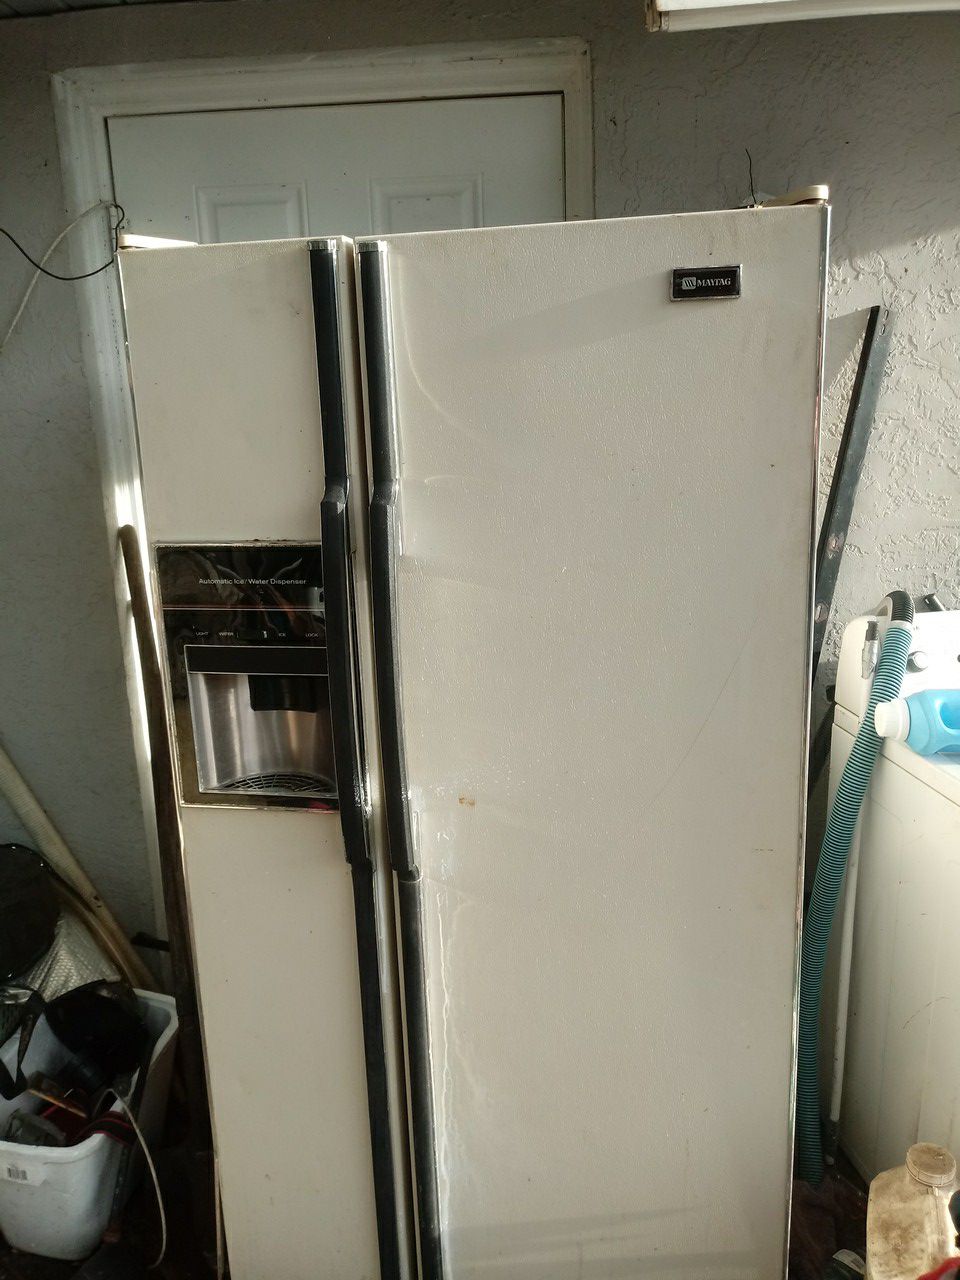 White side-by-side refrigerator with automatic ice maker